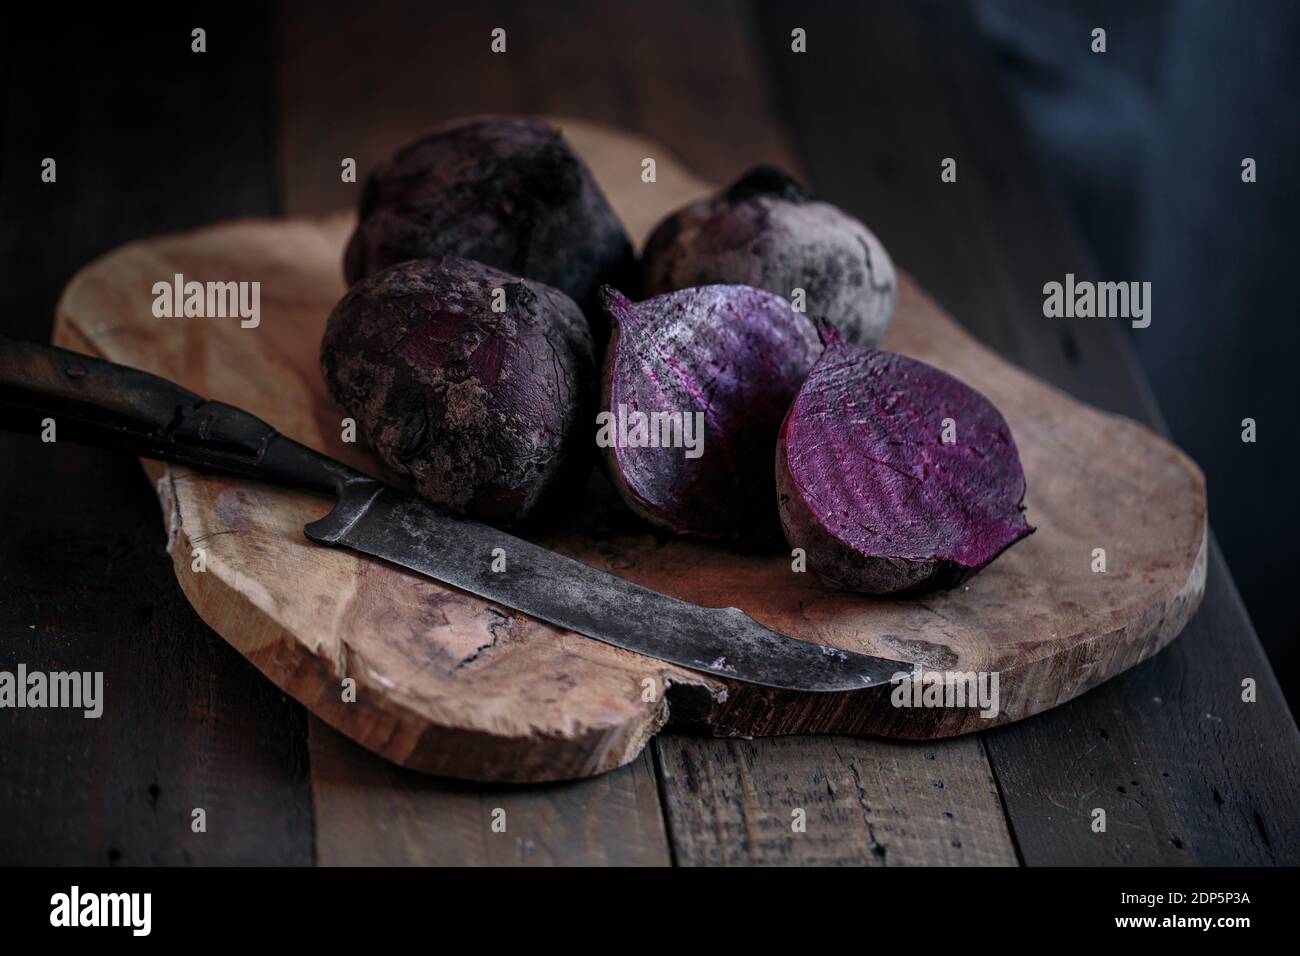 Rustic Country Style Still Life with Beetroot Stock Photo